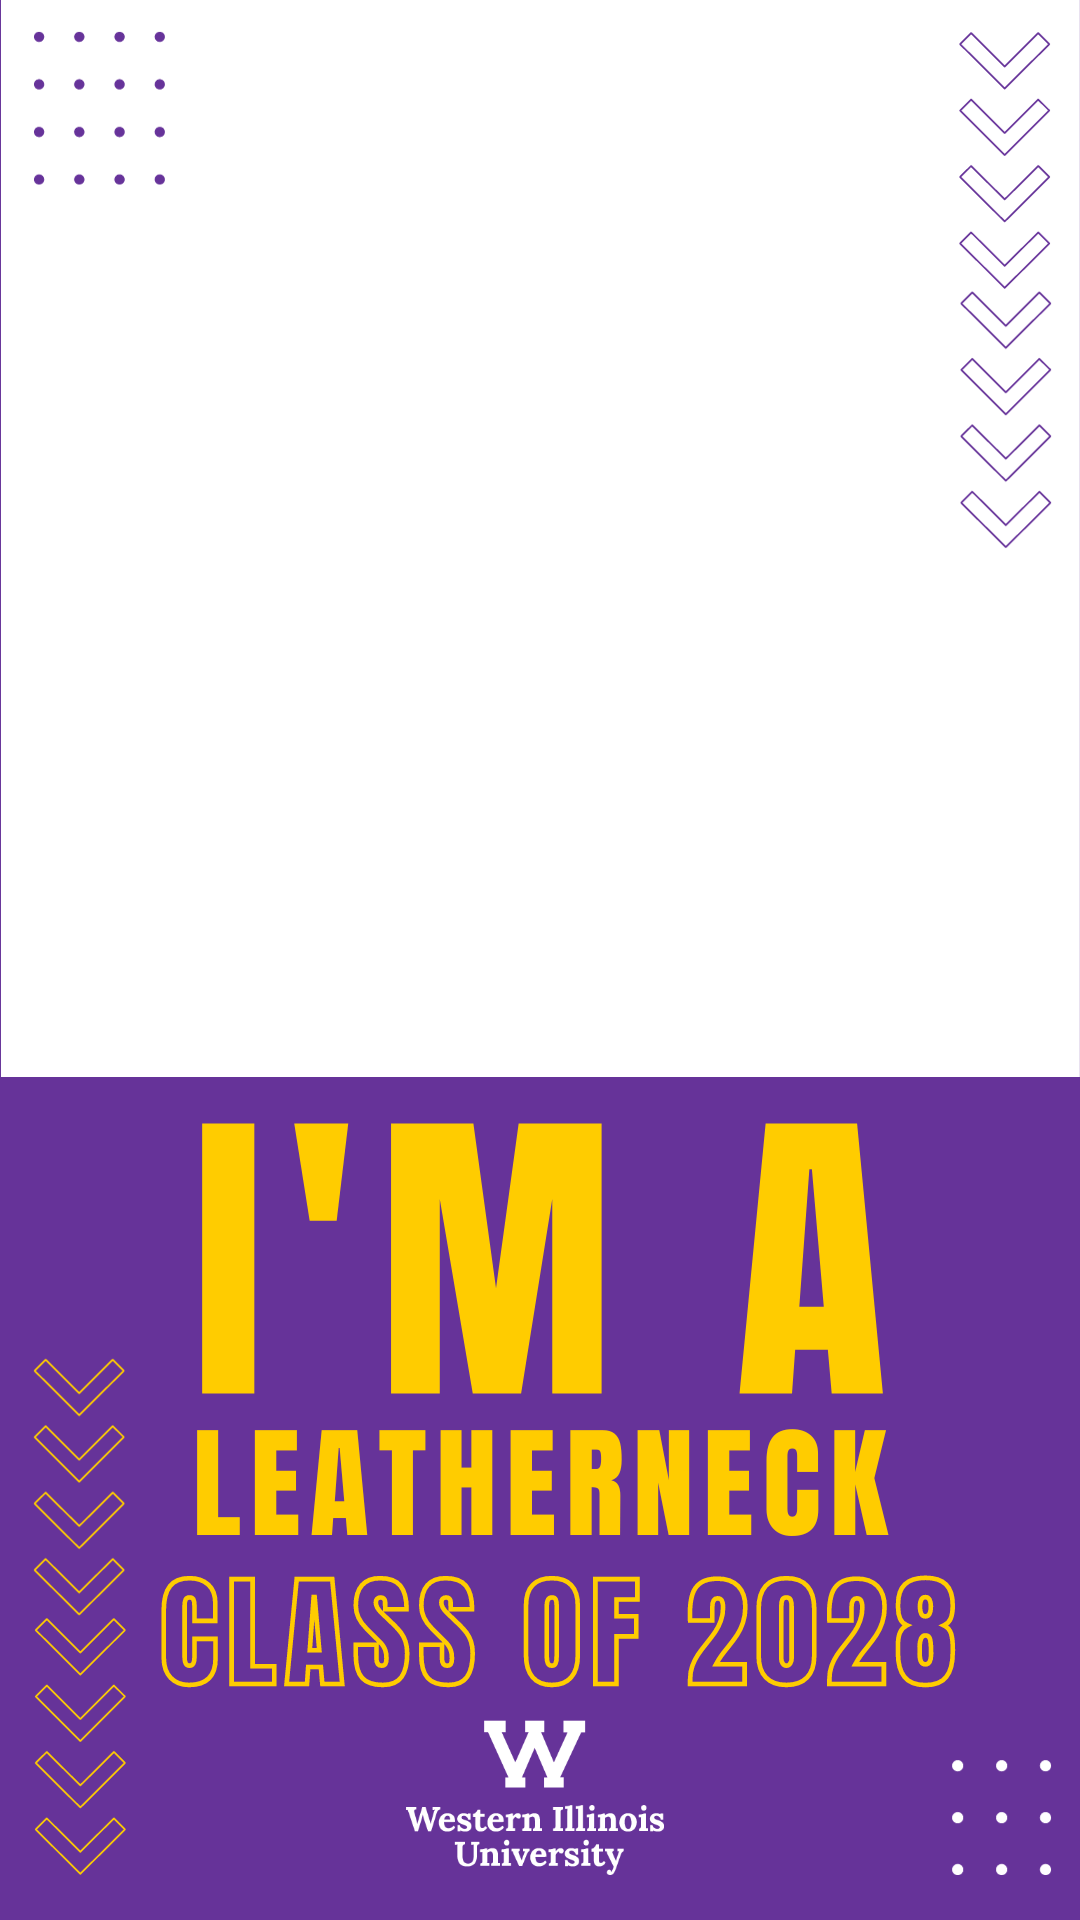 I'm a Leatherneck. Class of 2028.